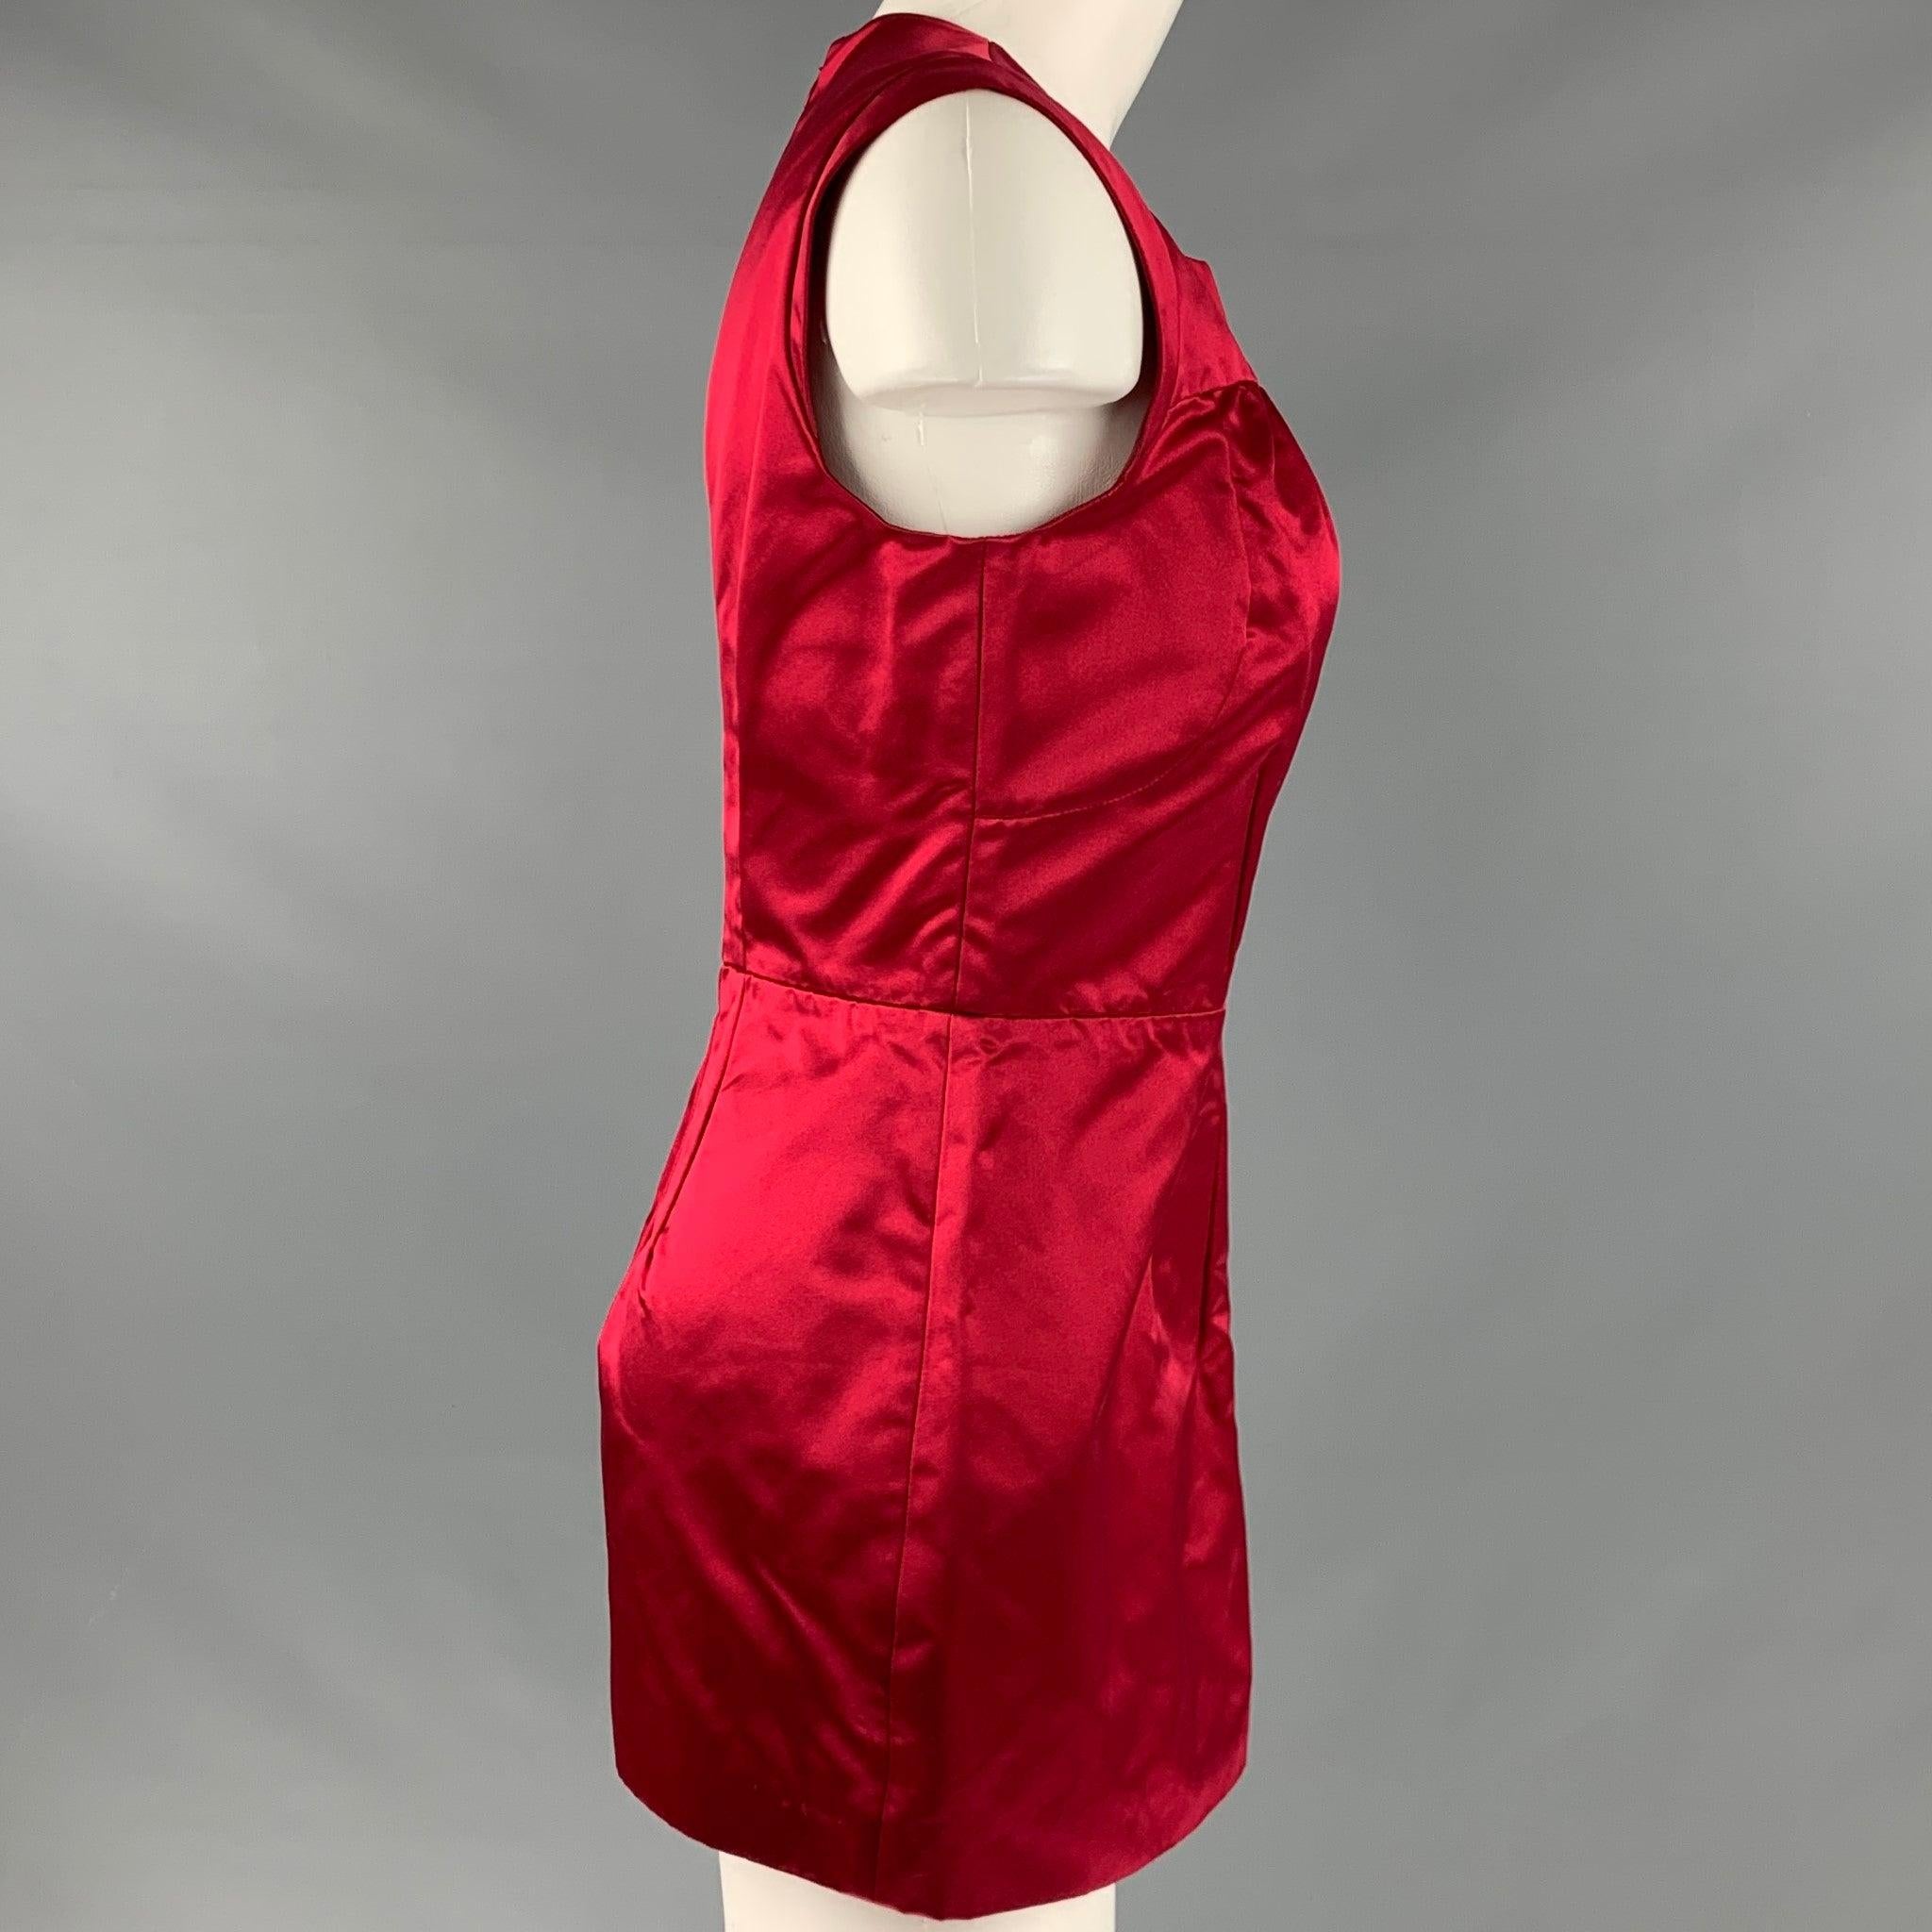 PRADA dress top
in a red silk fabric featuring a sleeveless style, pleated details, and a back zipper closure. Made in Italy.Good Pre-Owned Condition. Moderate signs of wear, please check photos. 

Marked:  46 

Measurements: 
 
Shoulder: 15.5